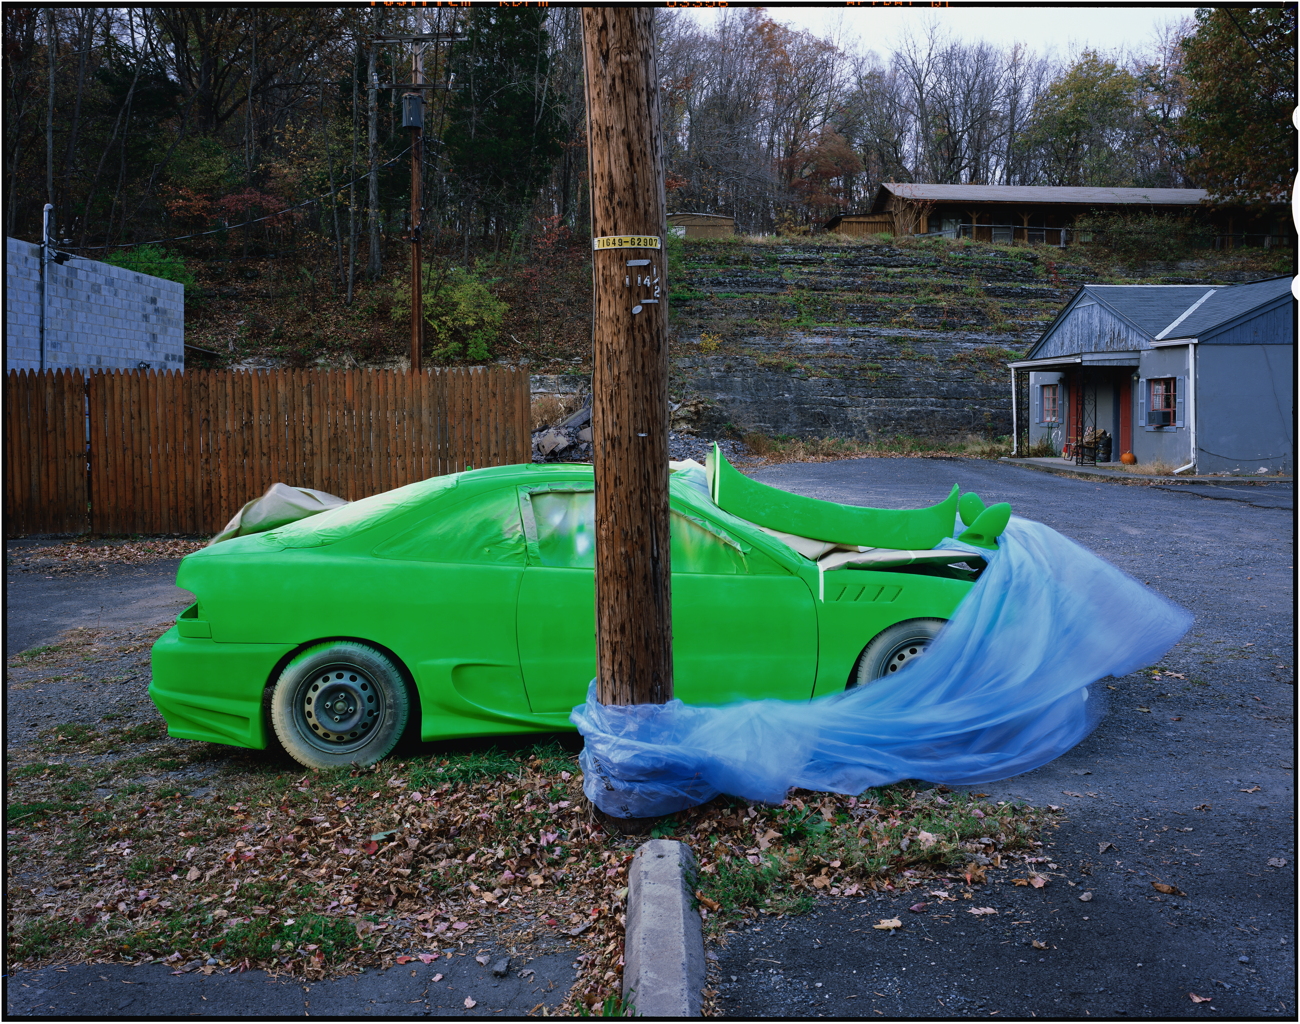 Painted car, upstate New York, 2005